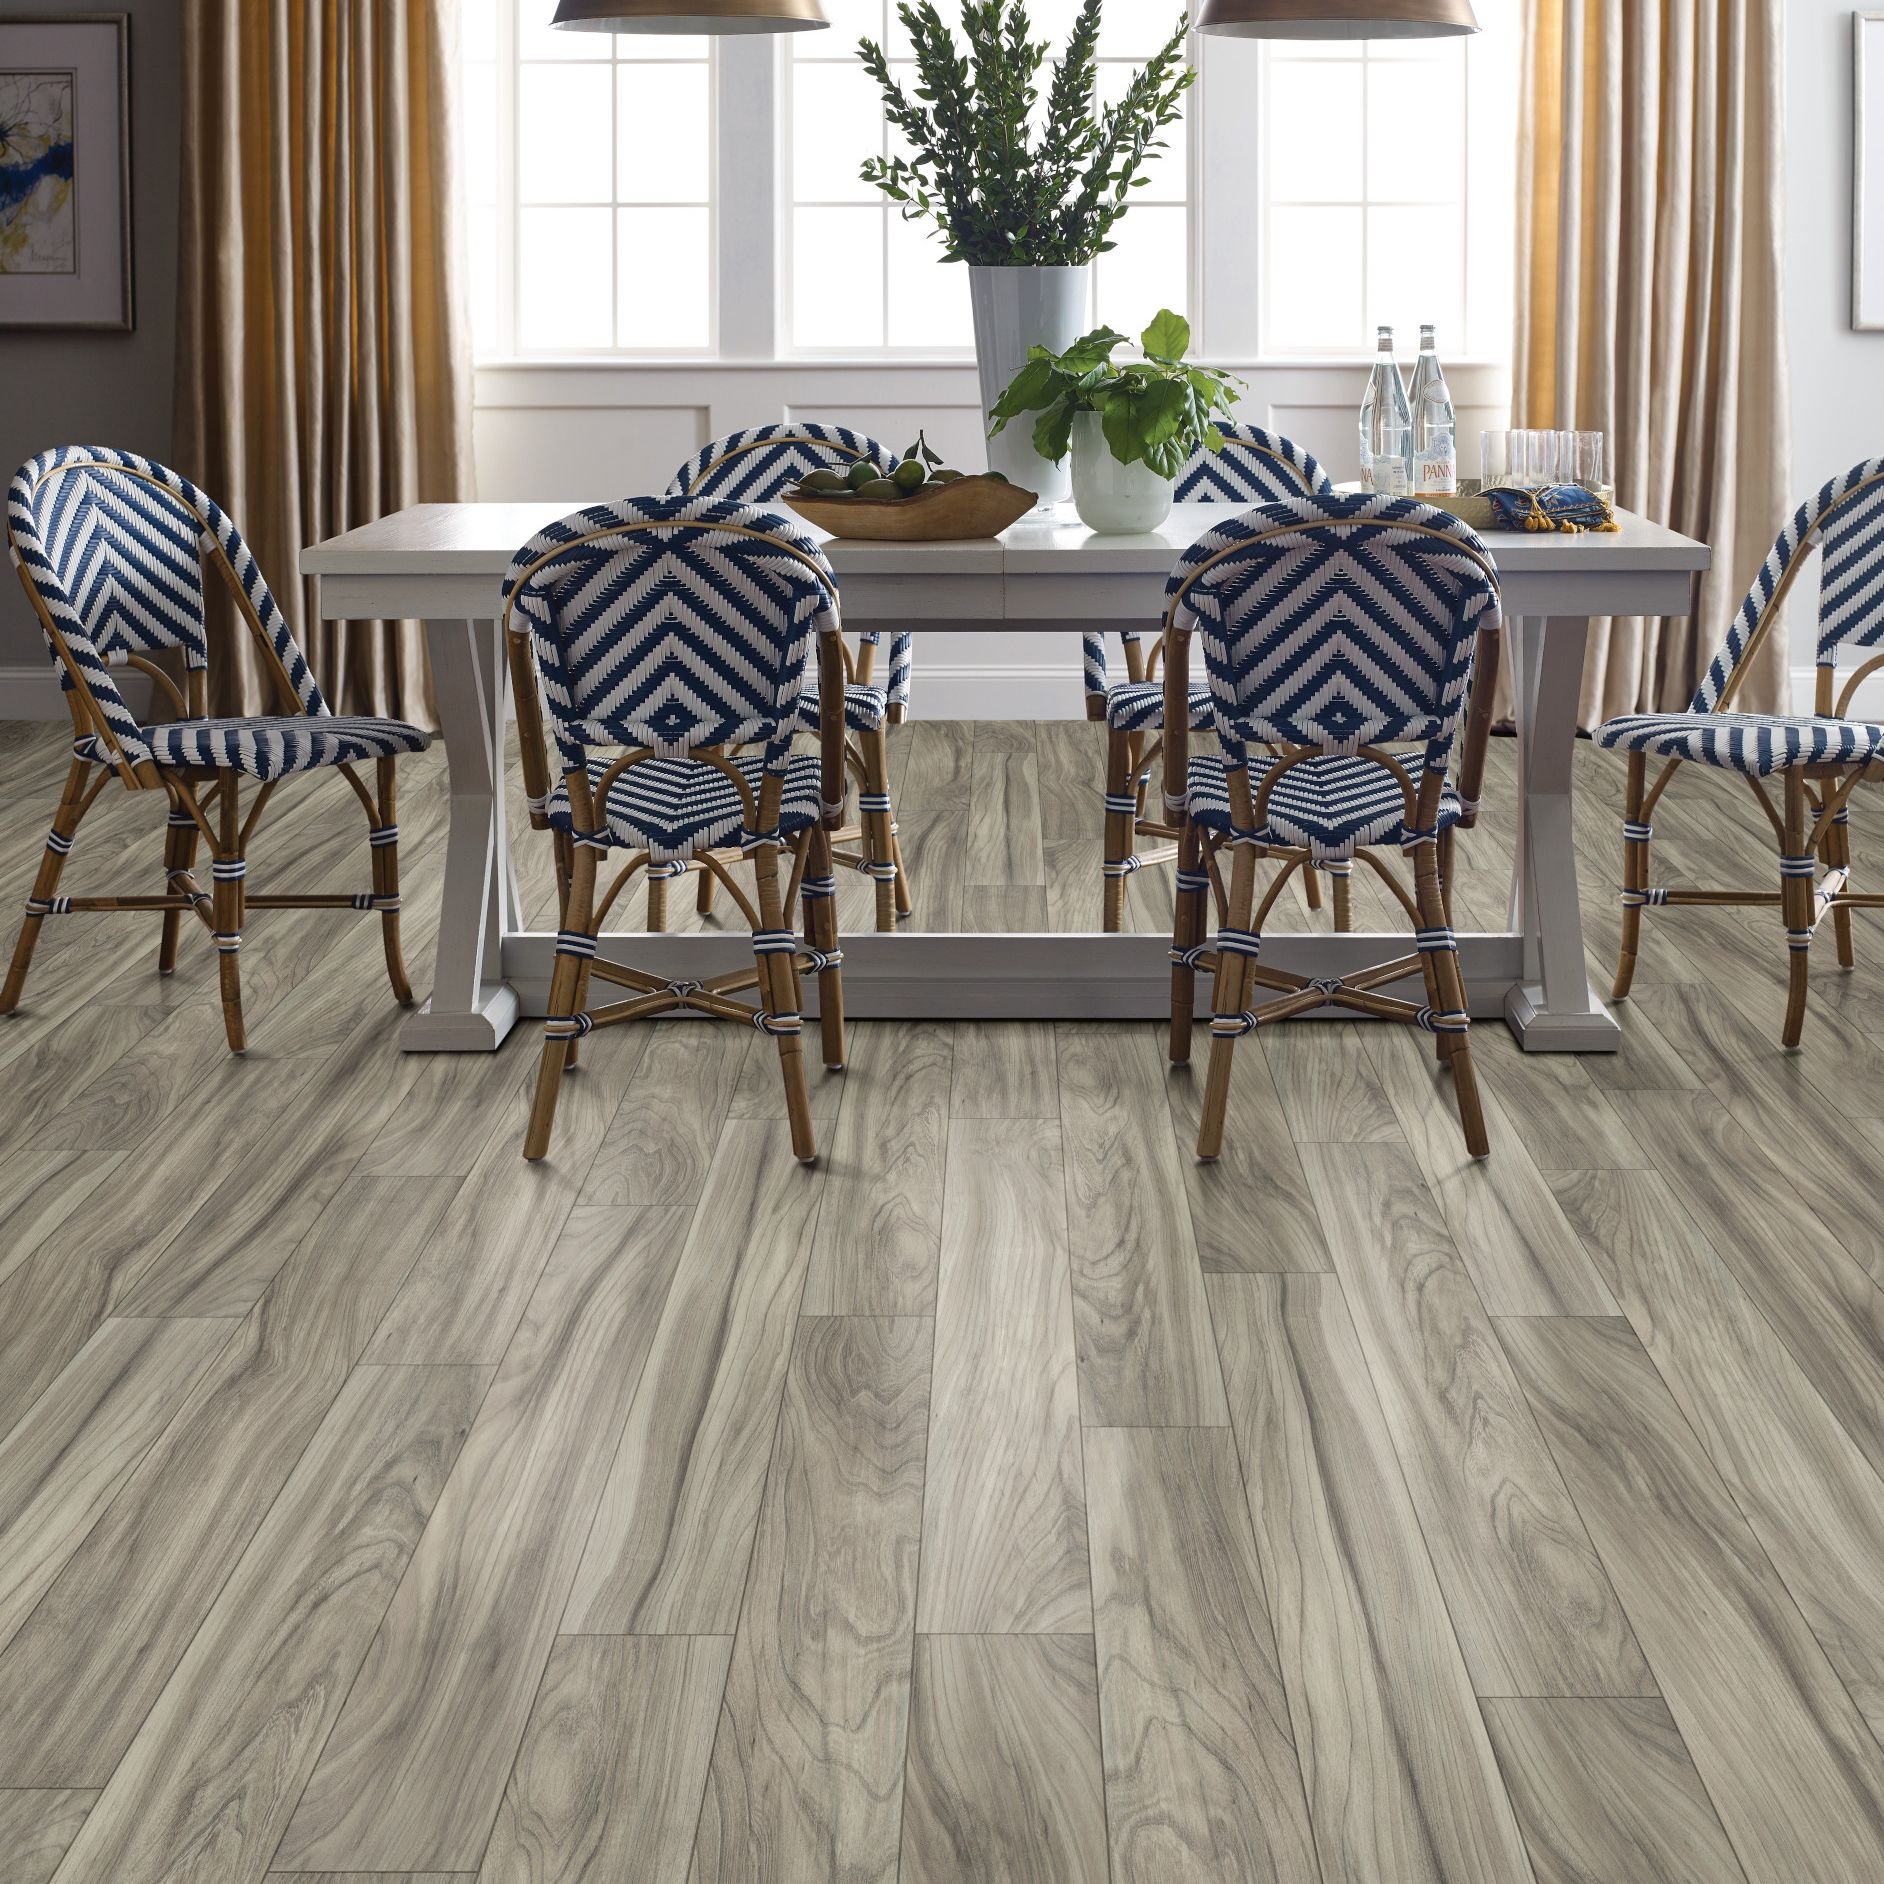 Repel Laminate Flooring Articles, Tips, Tricks & Solutions Provided By Carpet City Inc